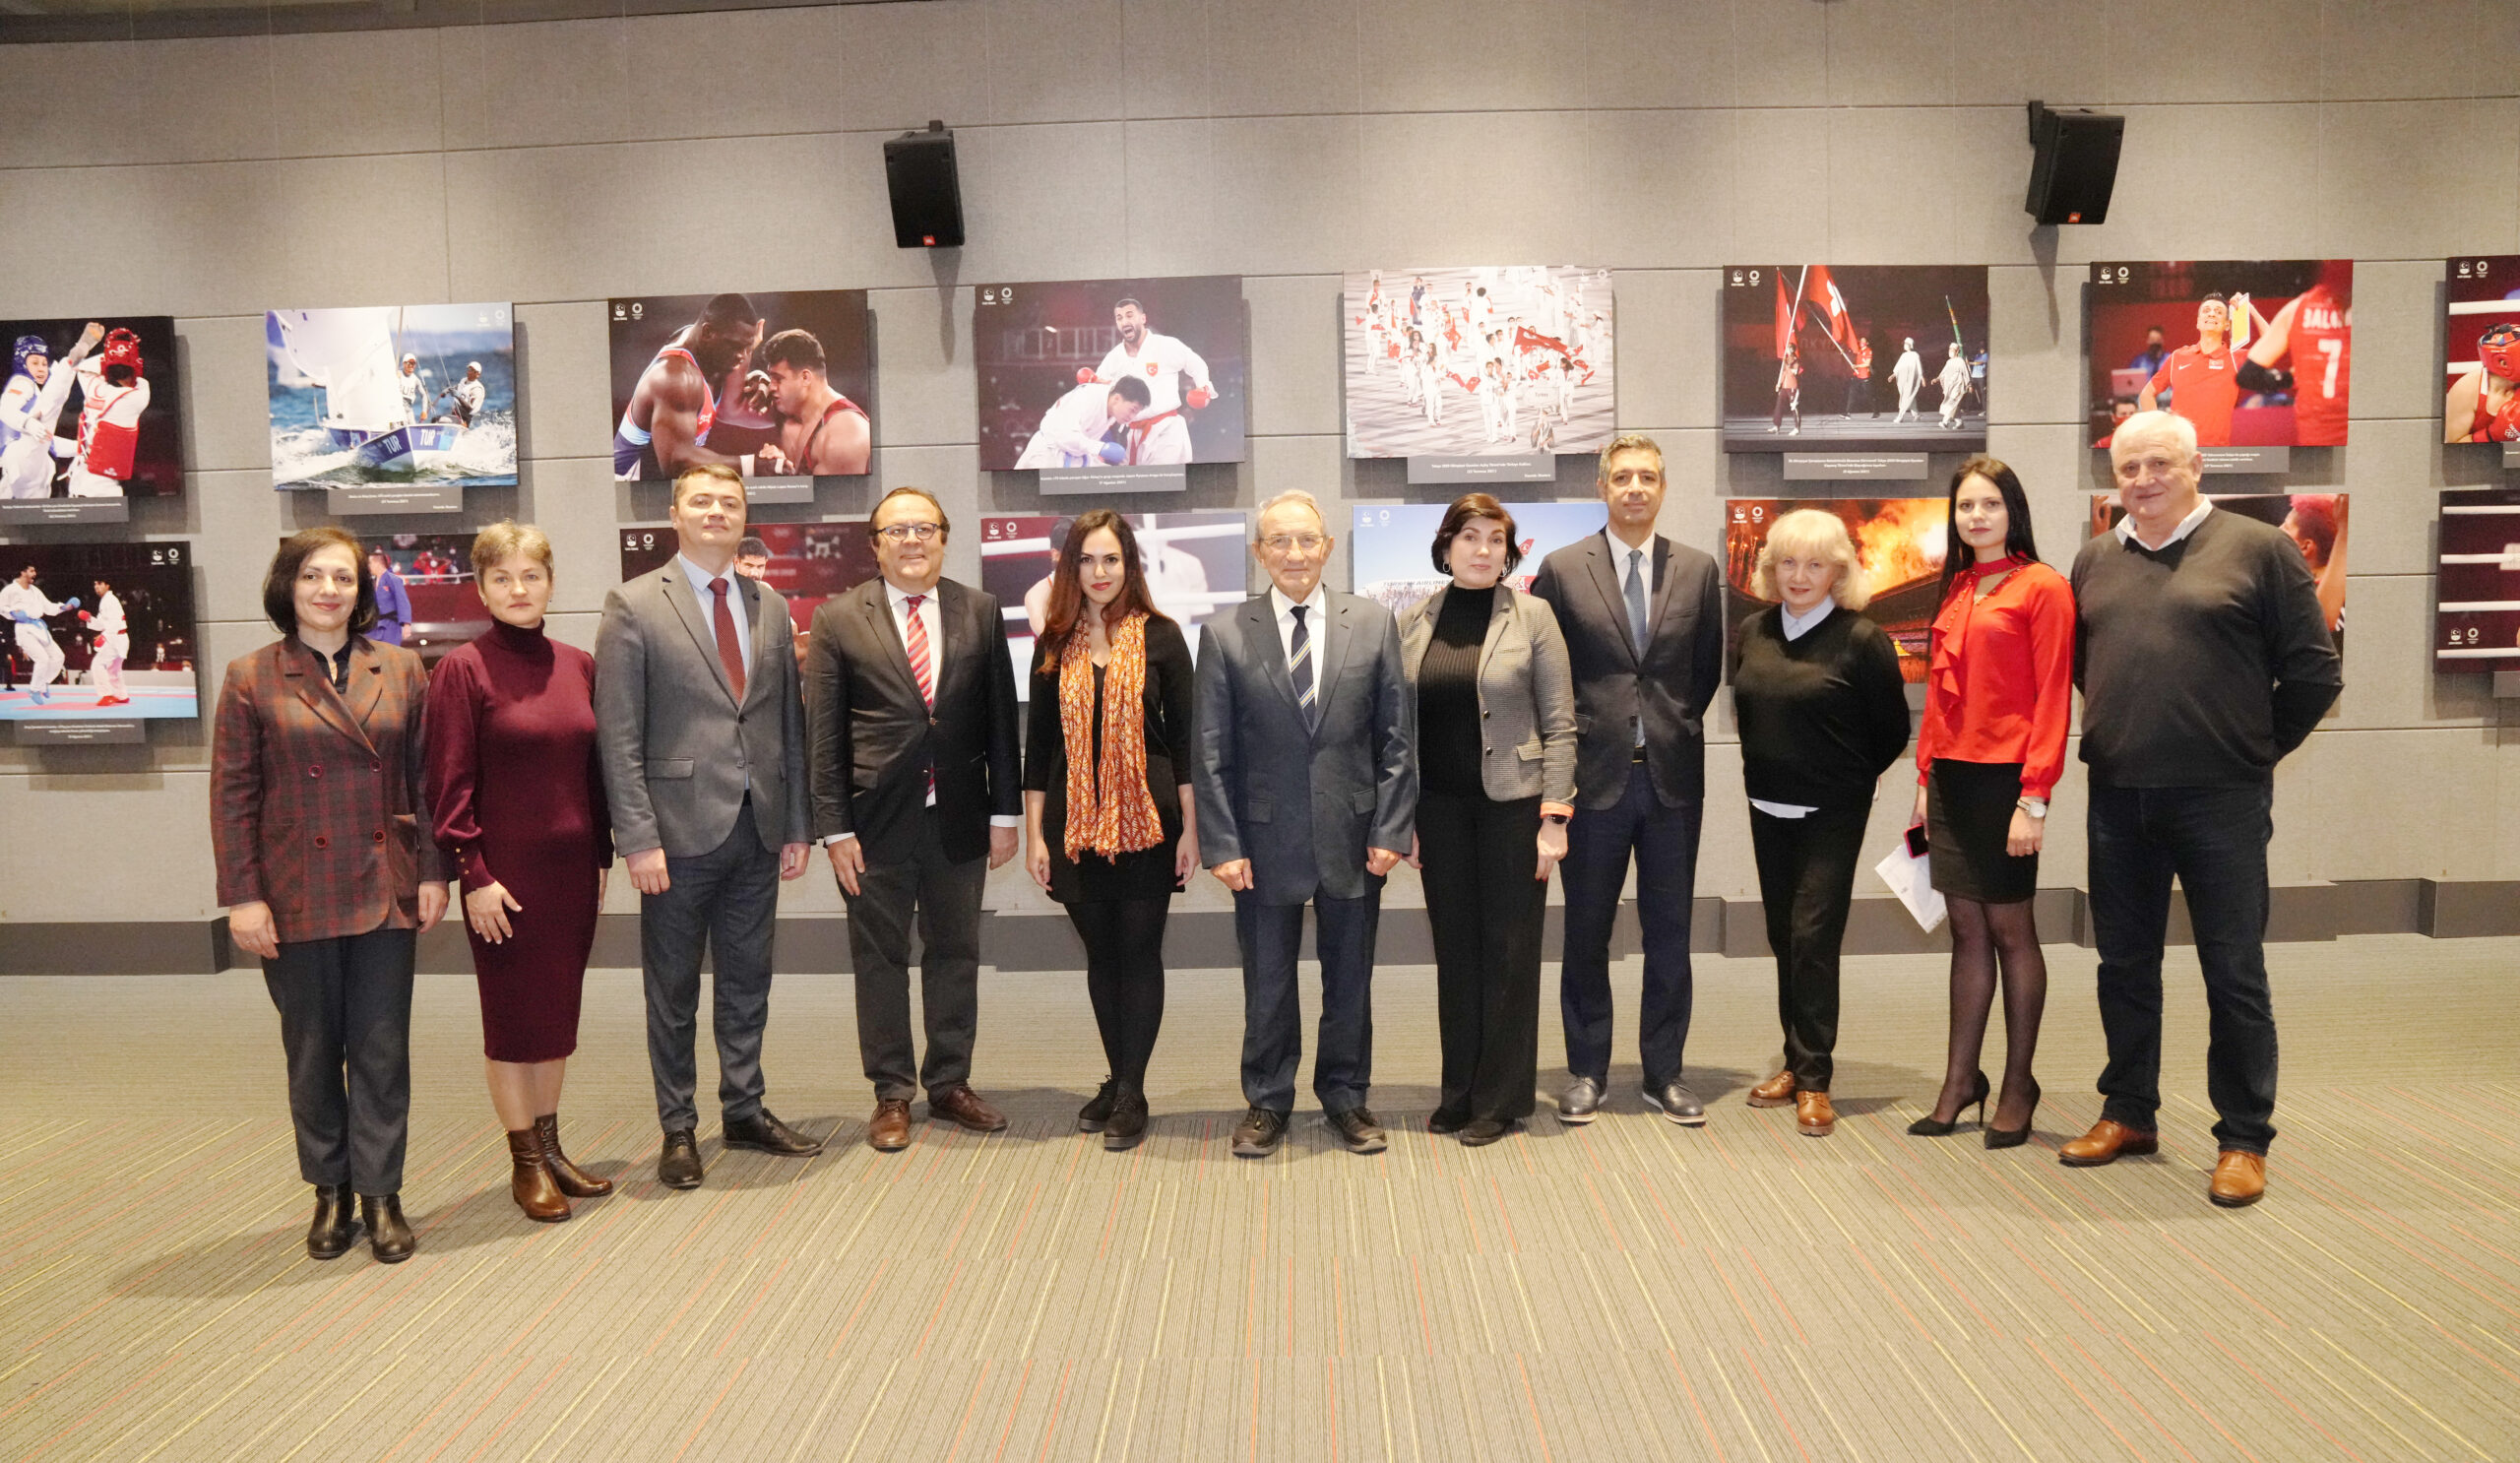 AN EVALUATION MEETING HELD WITHIN THE SCOPE OF MOLDOVA AND TÜRKİYE ANTI-DOPING COOPERATIONS